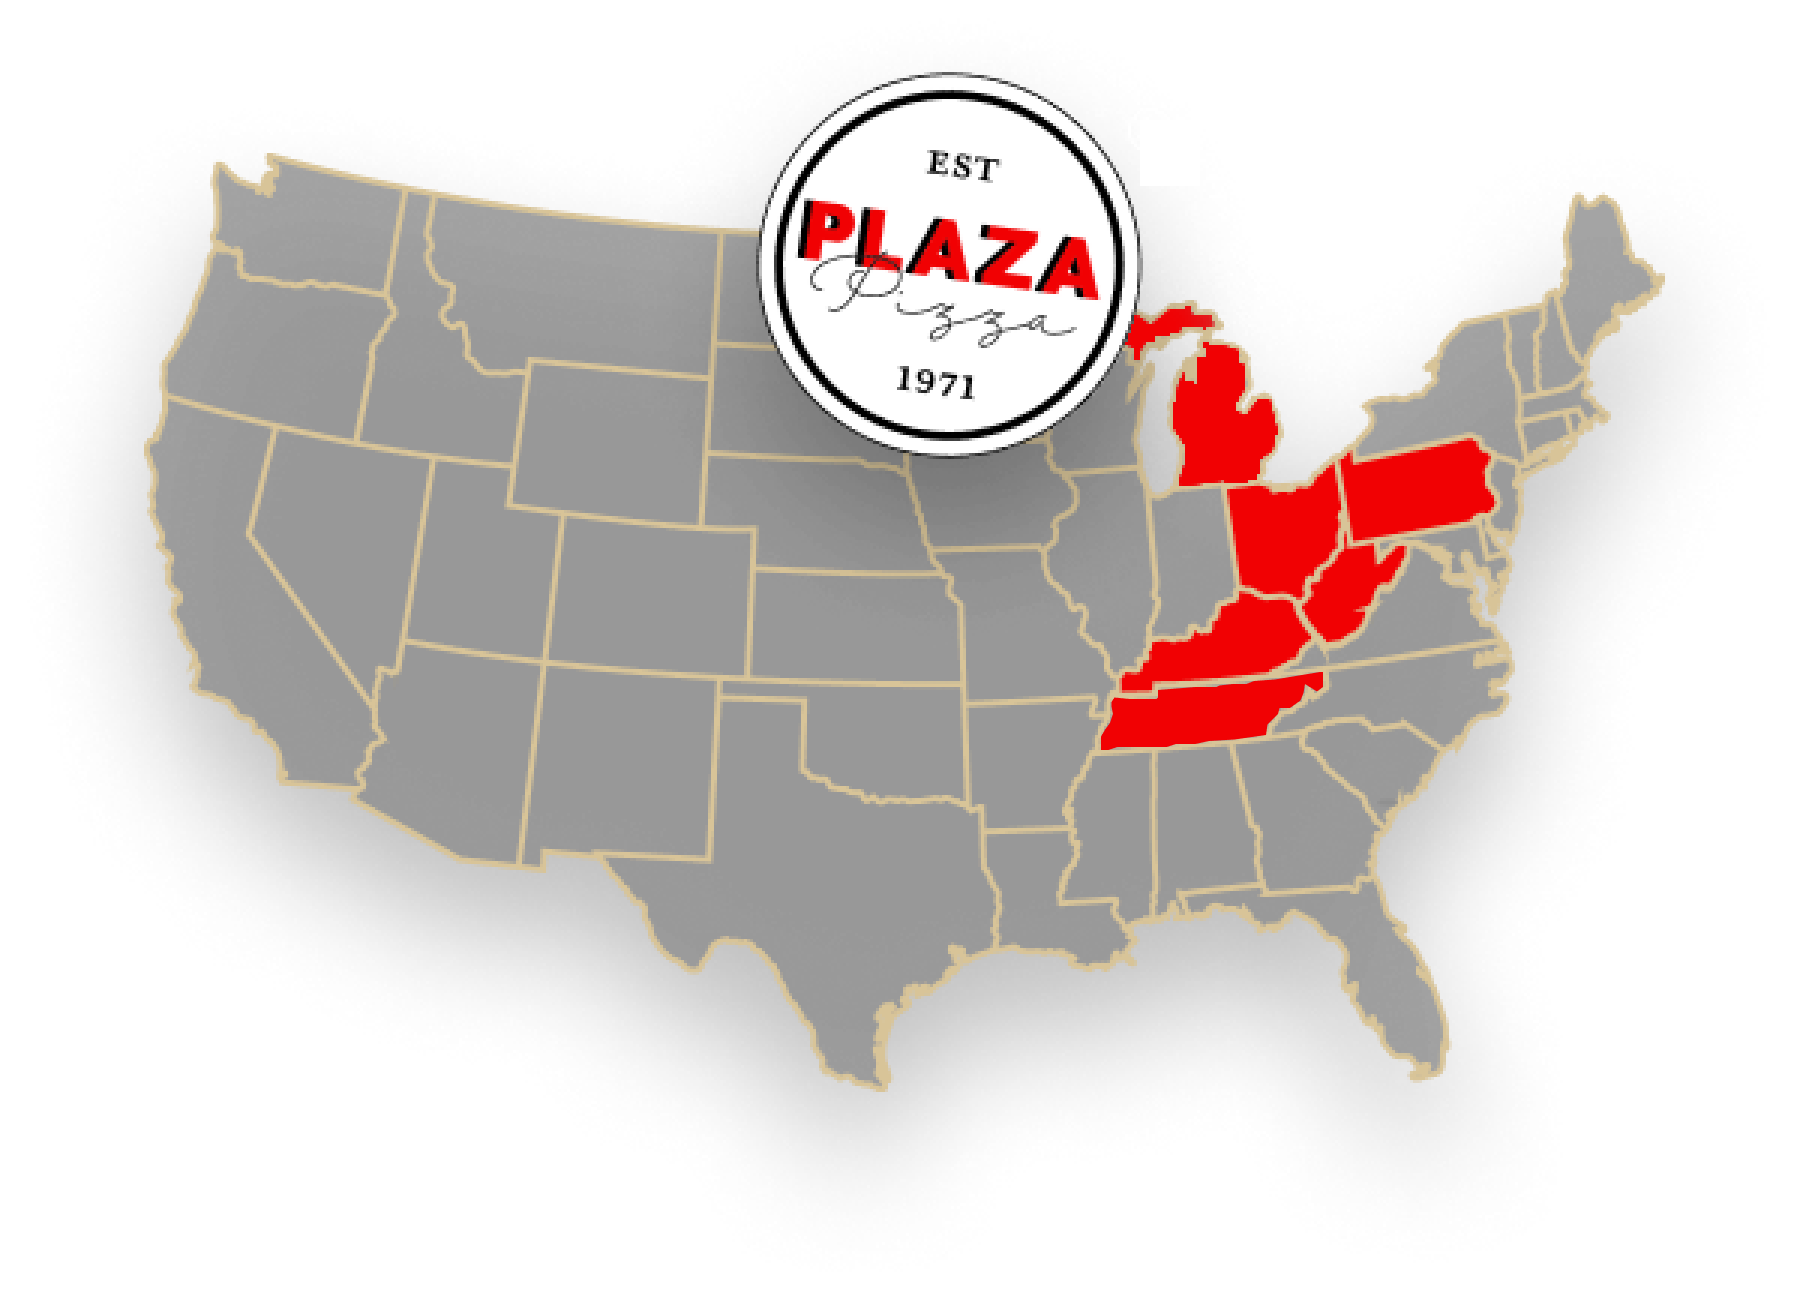 A map of the united states showing the location of plaza